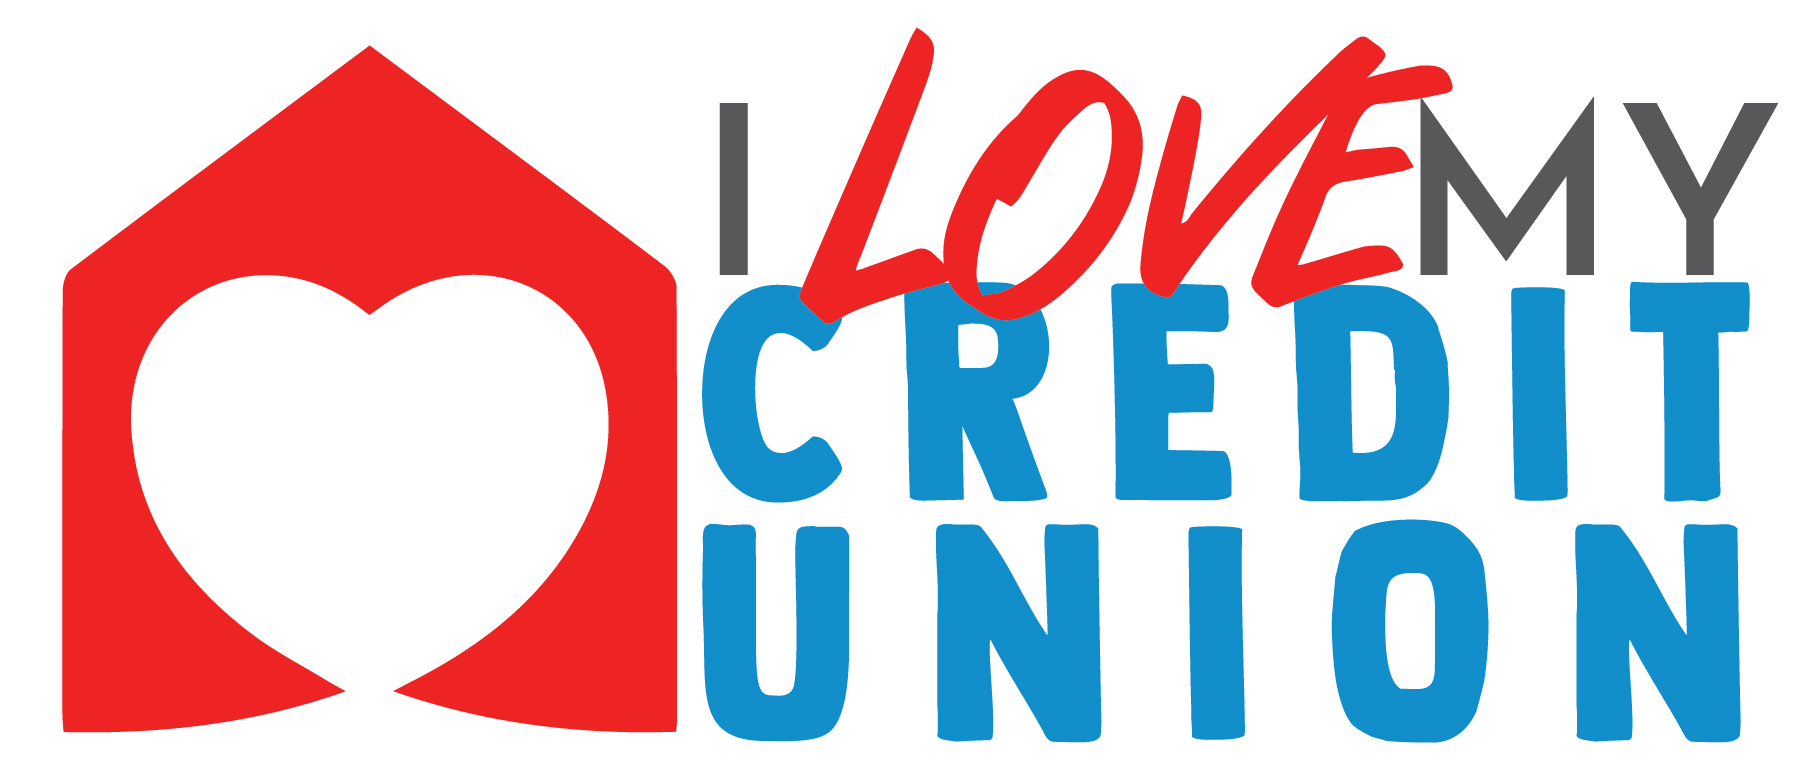 Tell your credit union story on #ILoveMyCreditUnion Day!